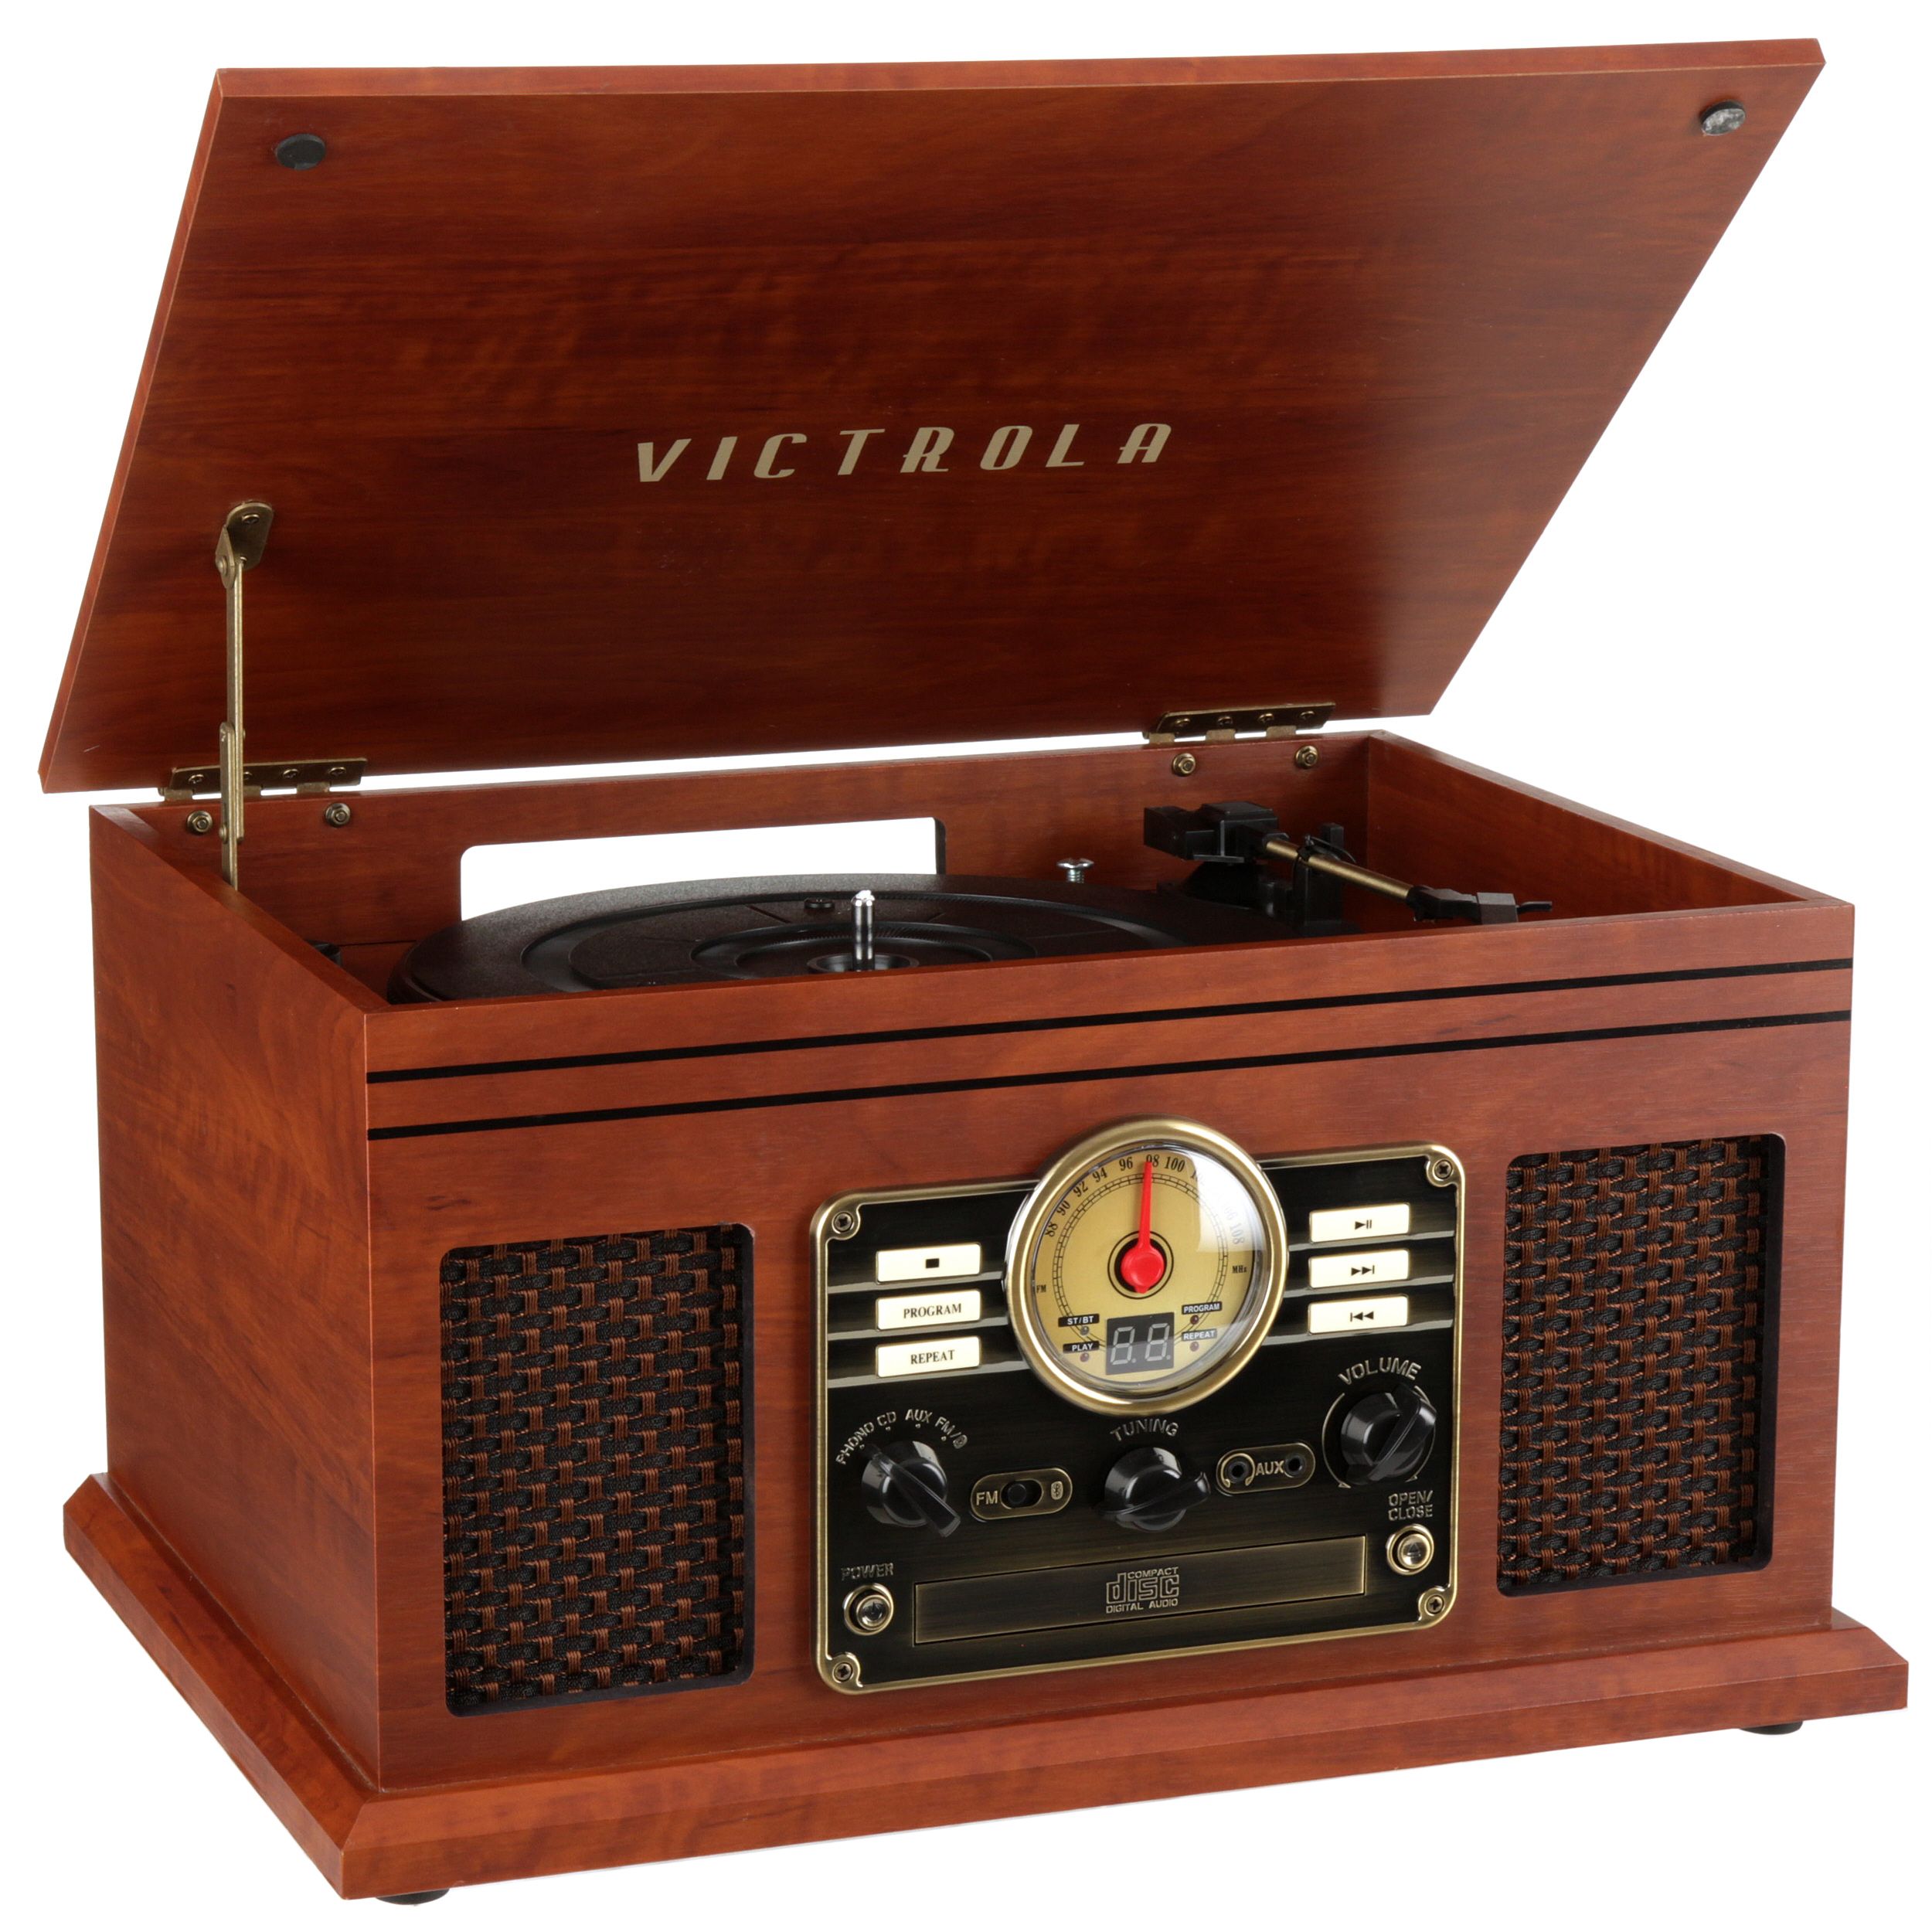 Victrola 6-in-1 Nostalgic Bluetooth Record Player with 3-Speed Turntable with CD and Cassette, Maghony - image 4 of 9